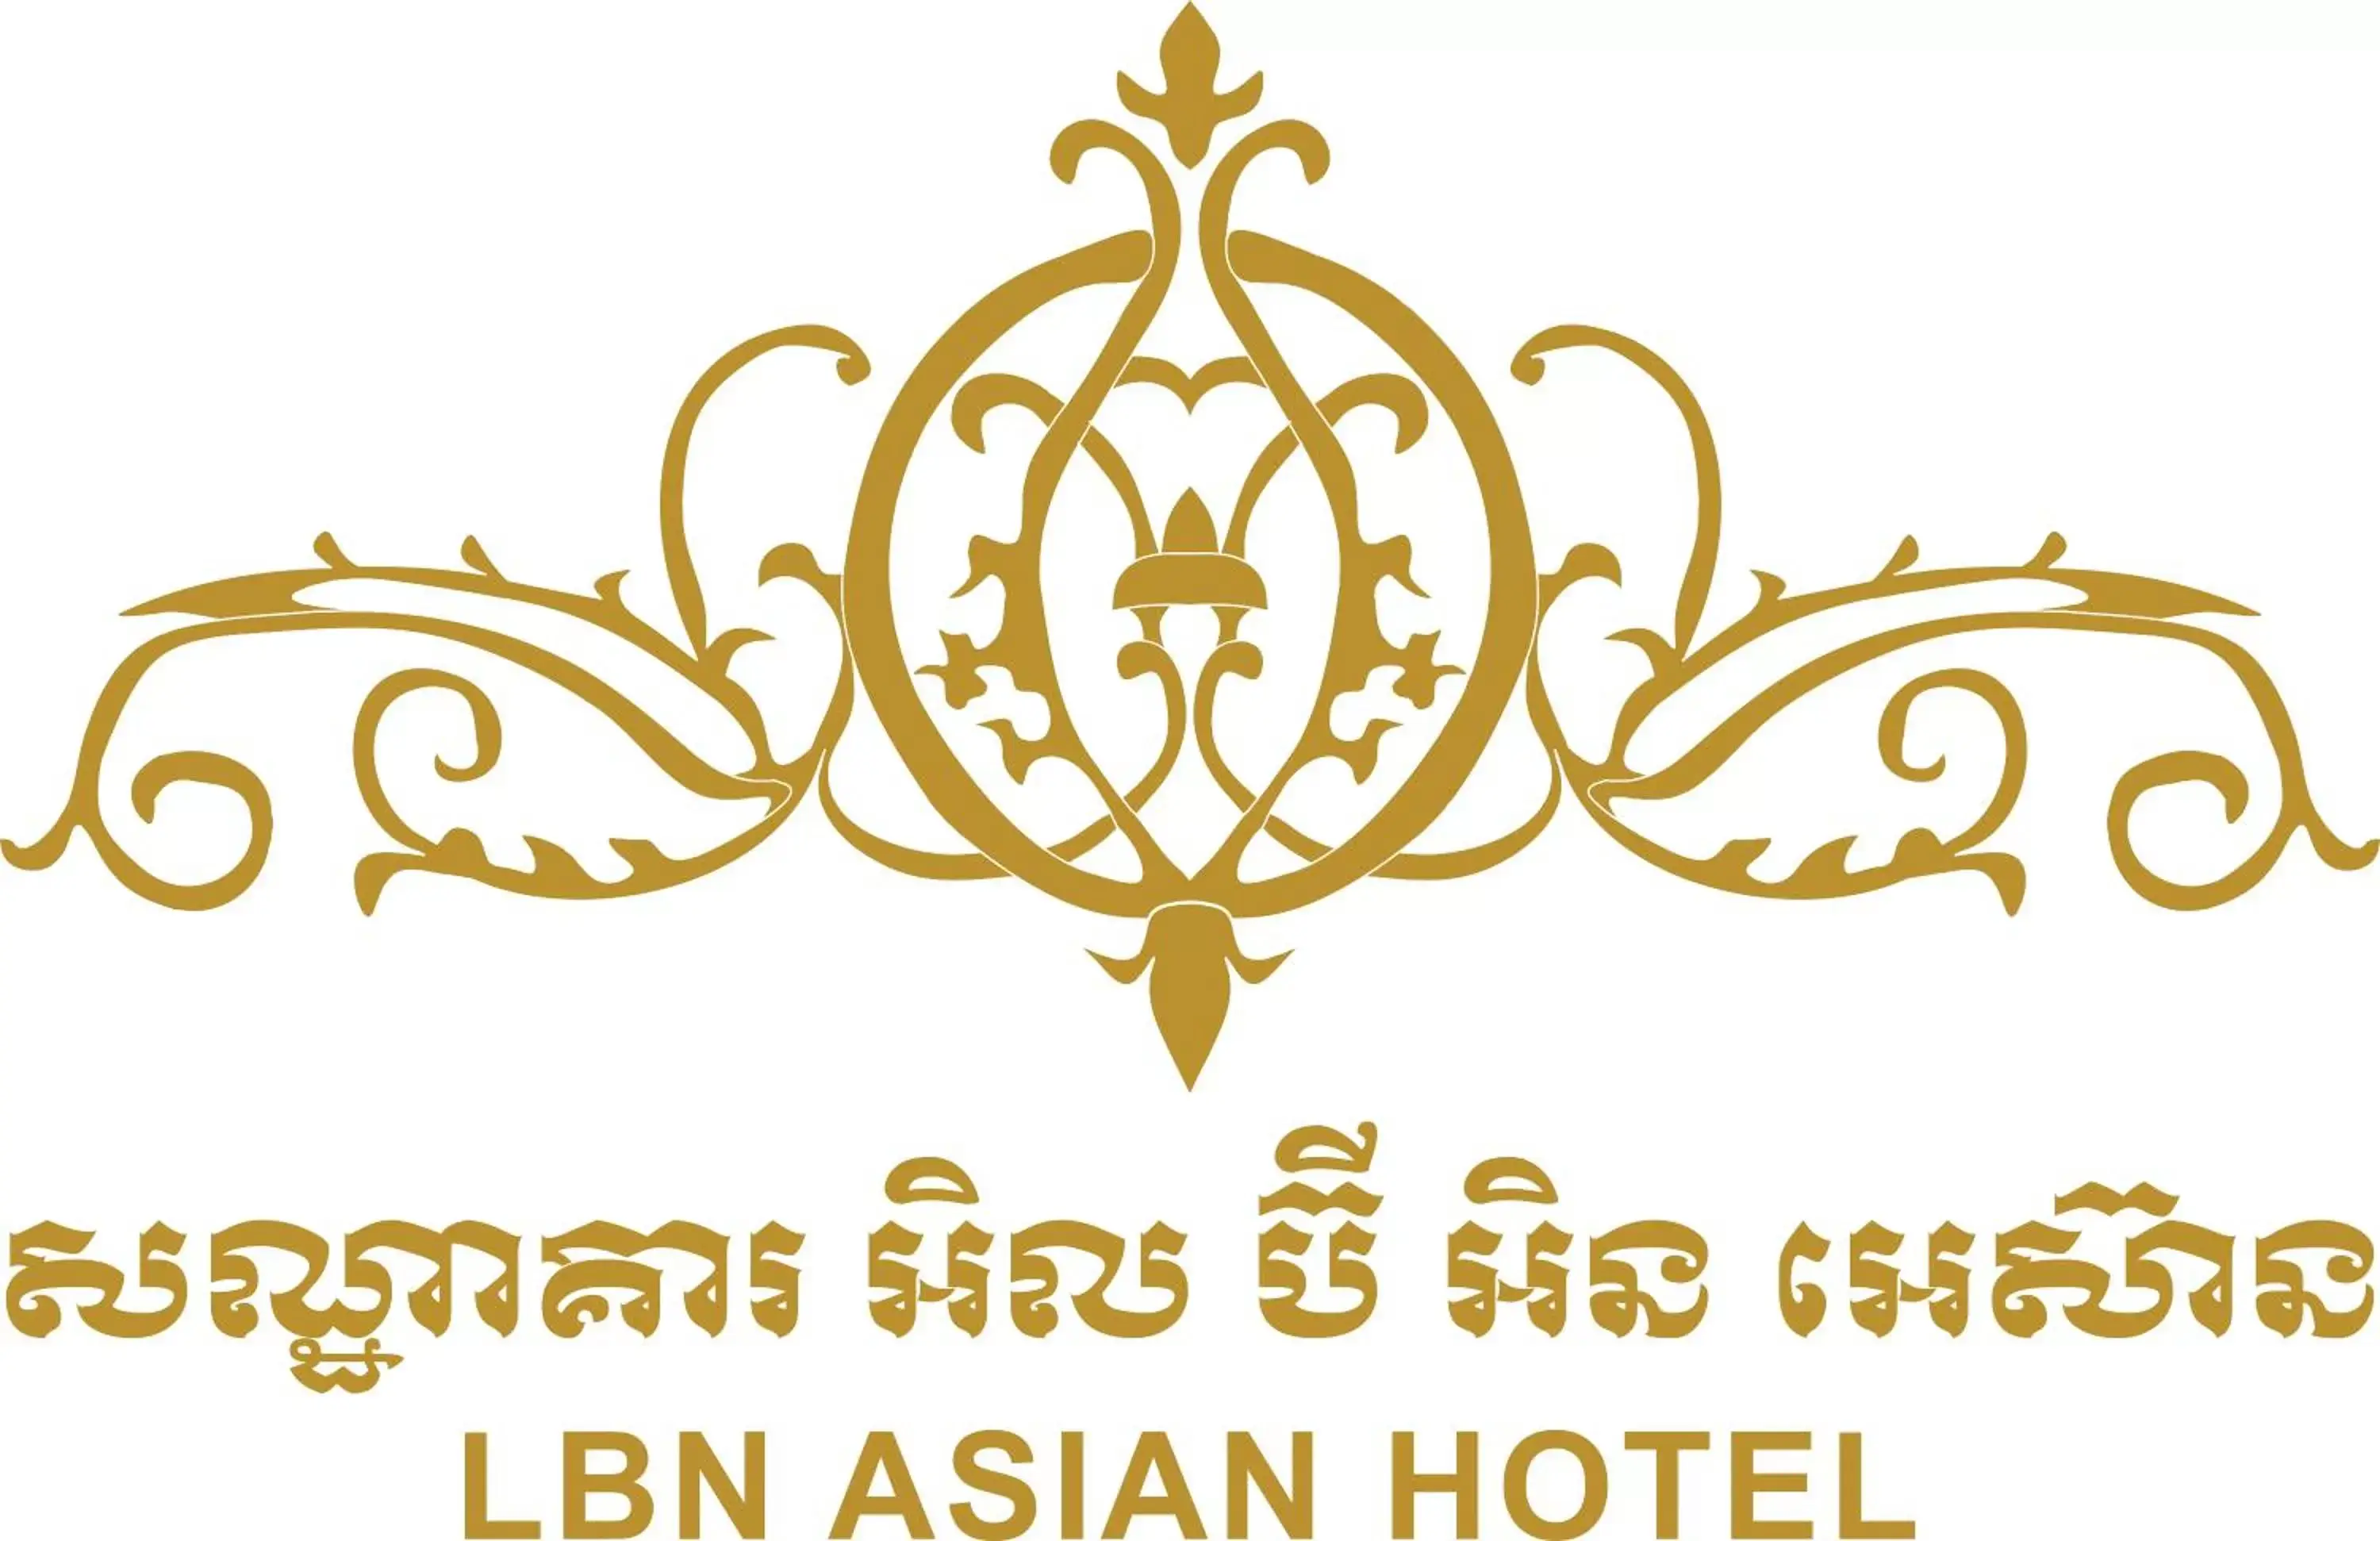 Property logo or sign in Lbn Asian Hotel